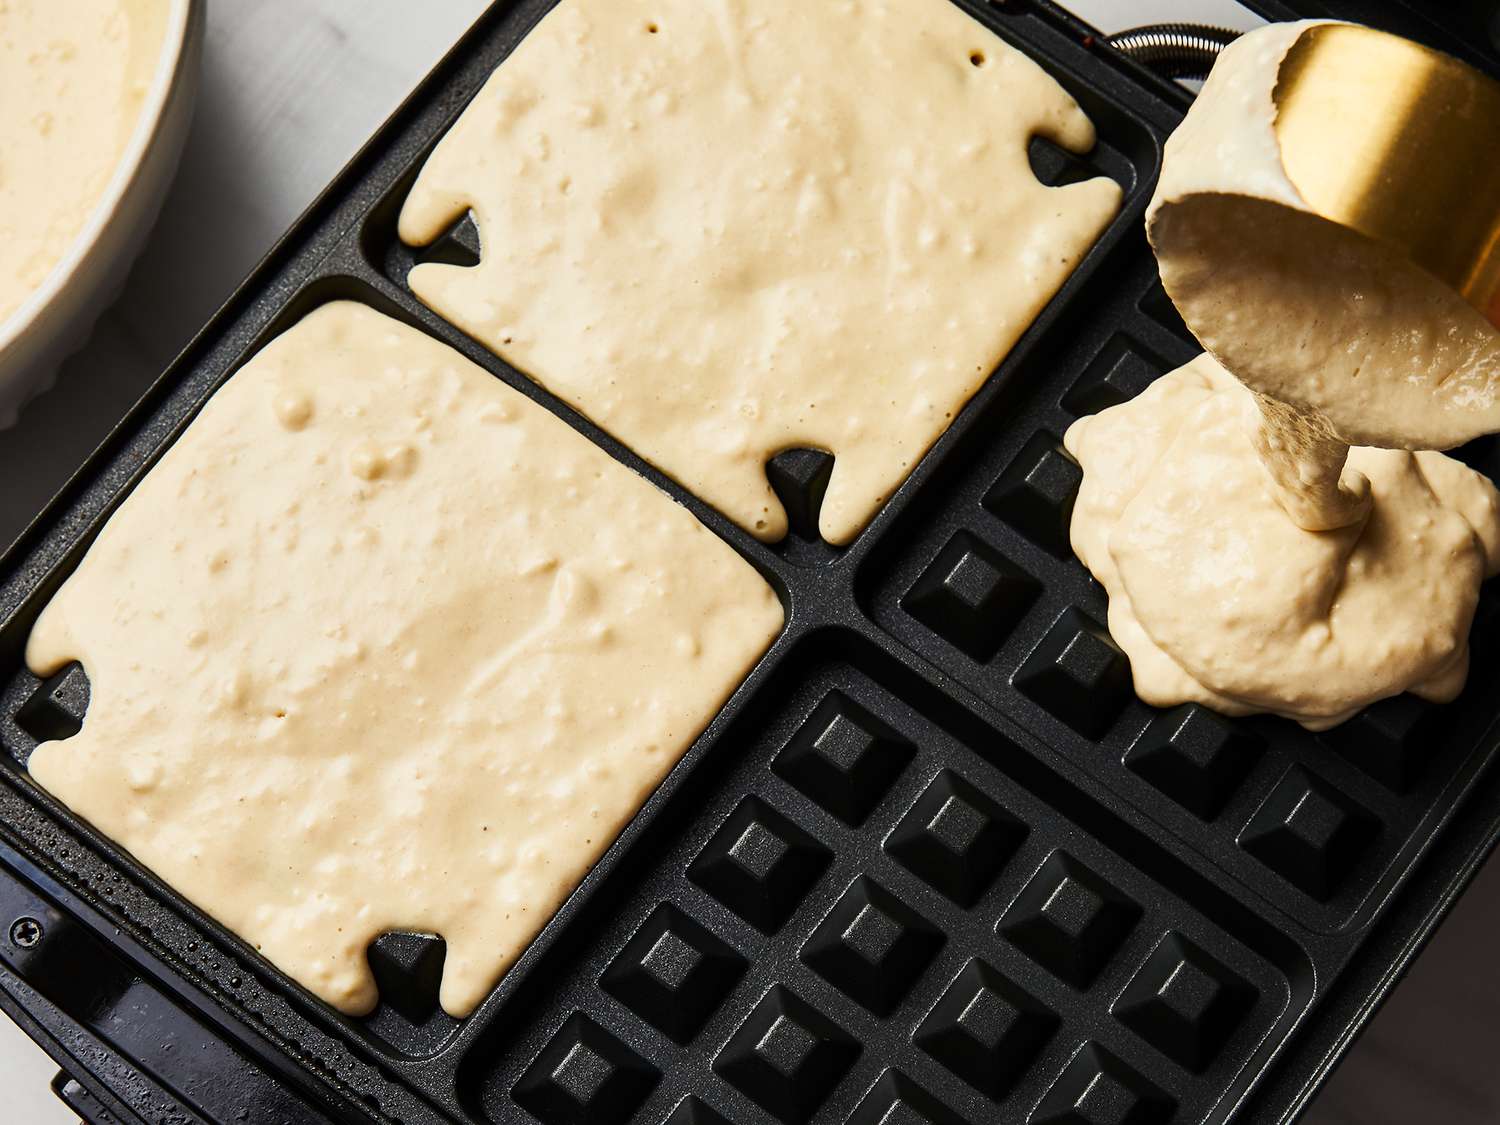 How Many Cups Of Batter Can The Chef’s Choice Waffle Iron Be Make?